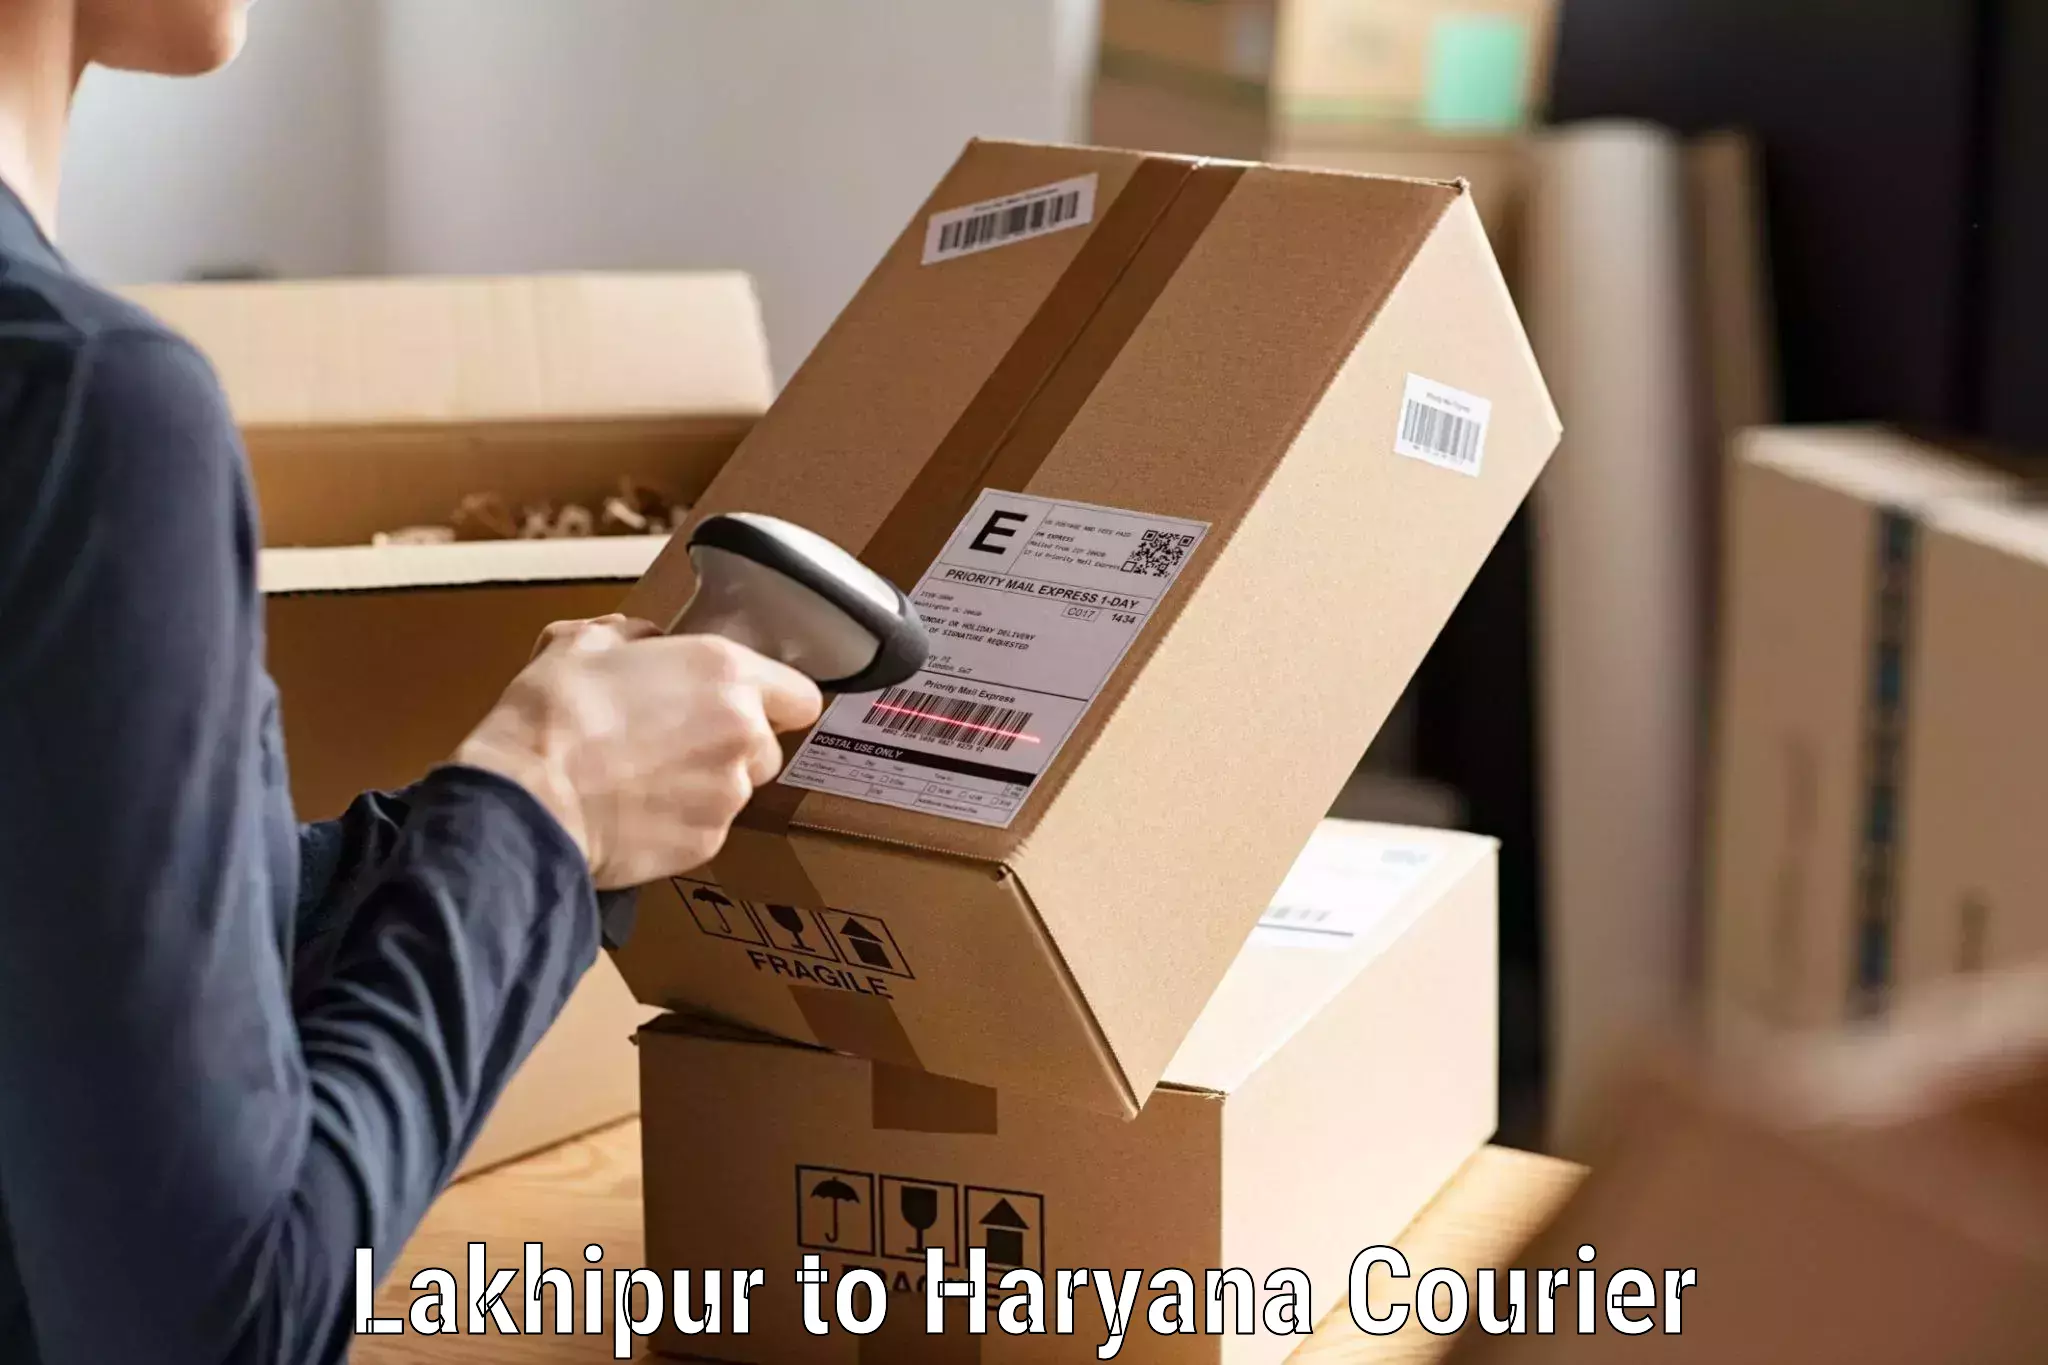 Courier service comparison Lakhipur to Siwani